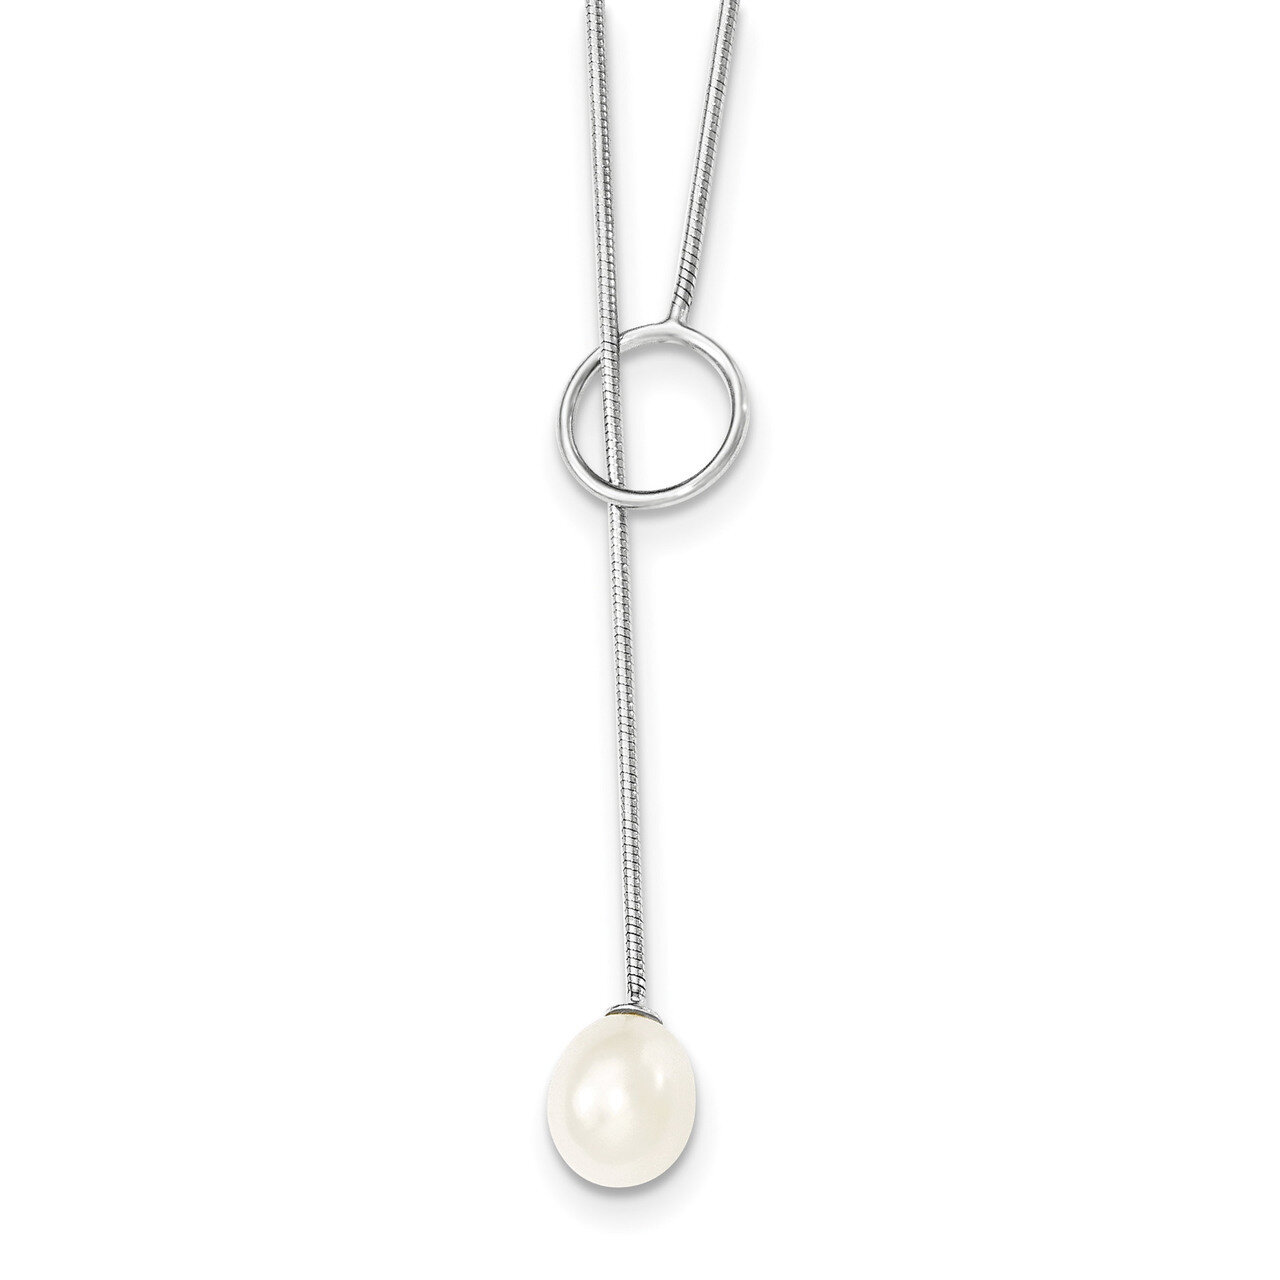 7-8mm White Cultured Freshwater Pearl Toggle Necklace 19.5 Inch Sterling Silver Rhodium-plated QG4145-19.5